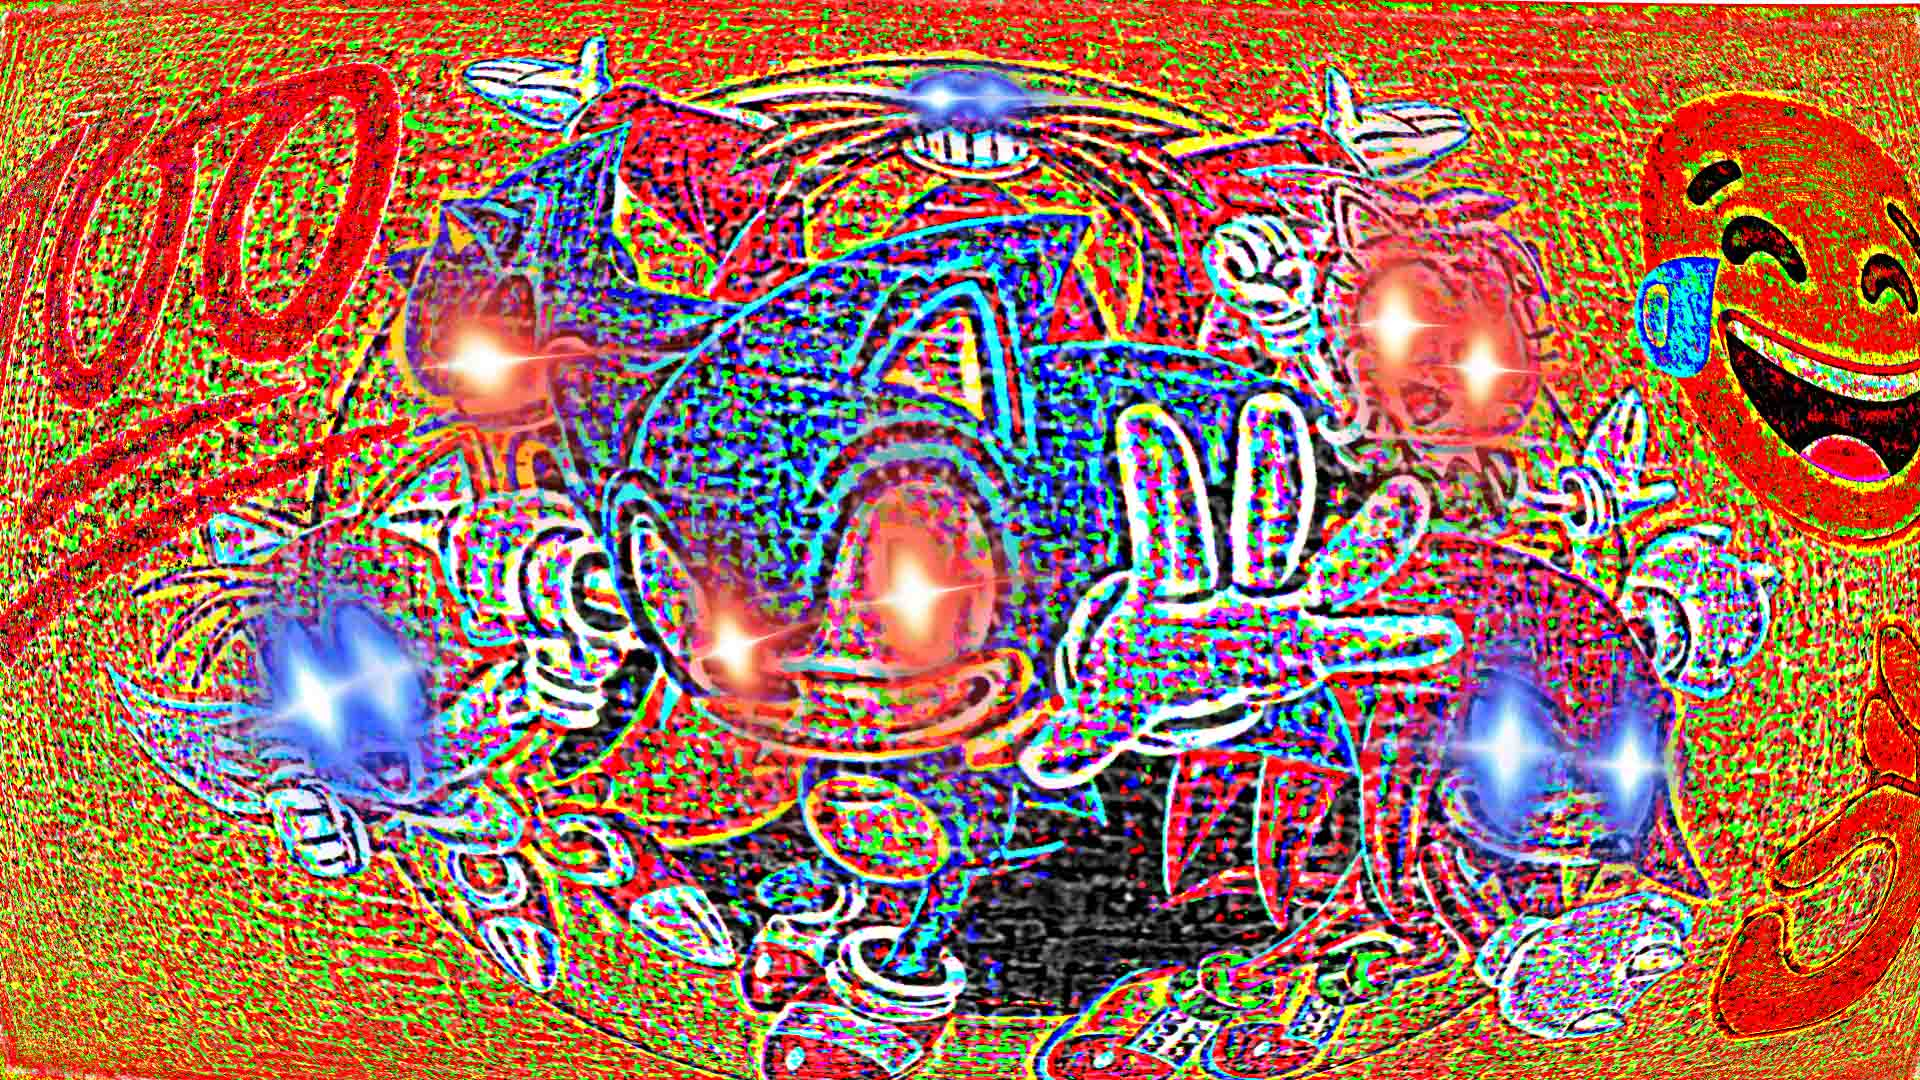 Deep fried sonic picture Blank Meme Template